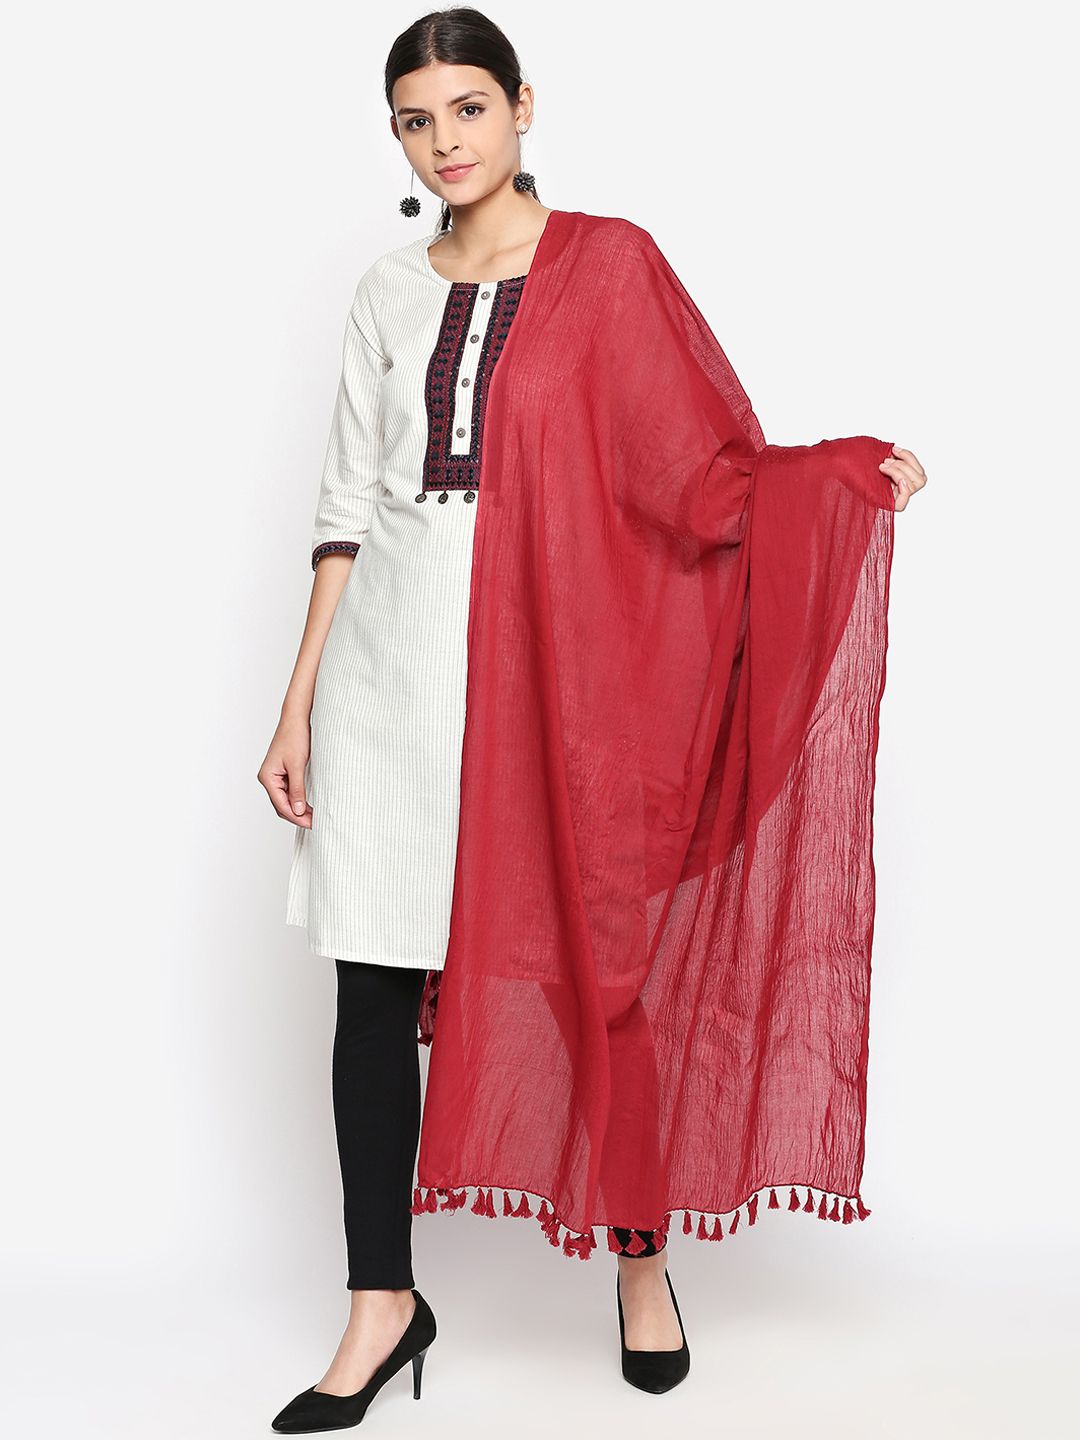 RANGMANCH BY PANTALOONS Red Solid Pure Cotton Dupatta Price in India